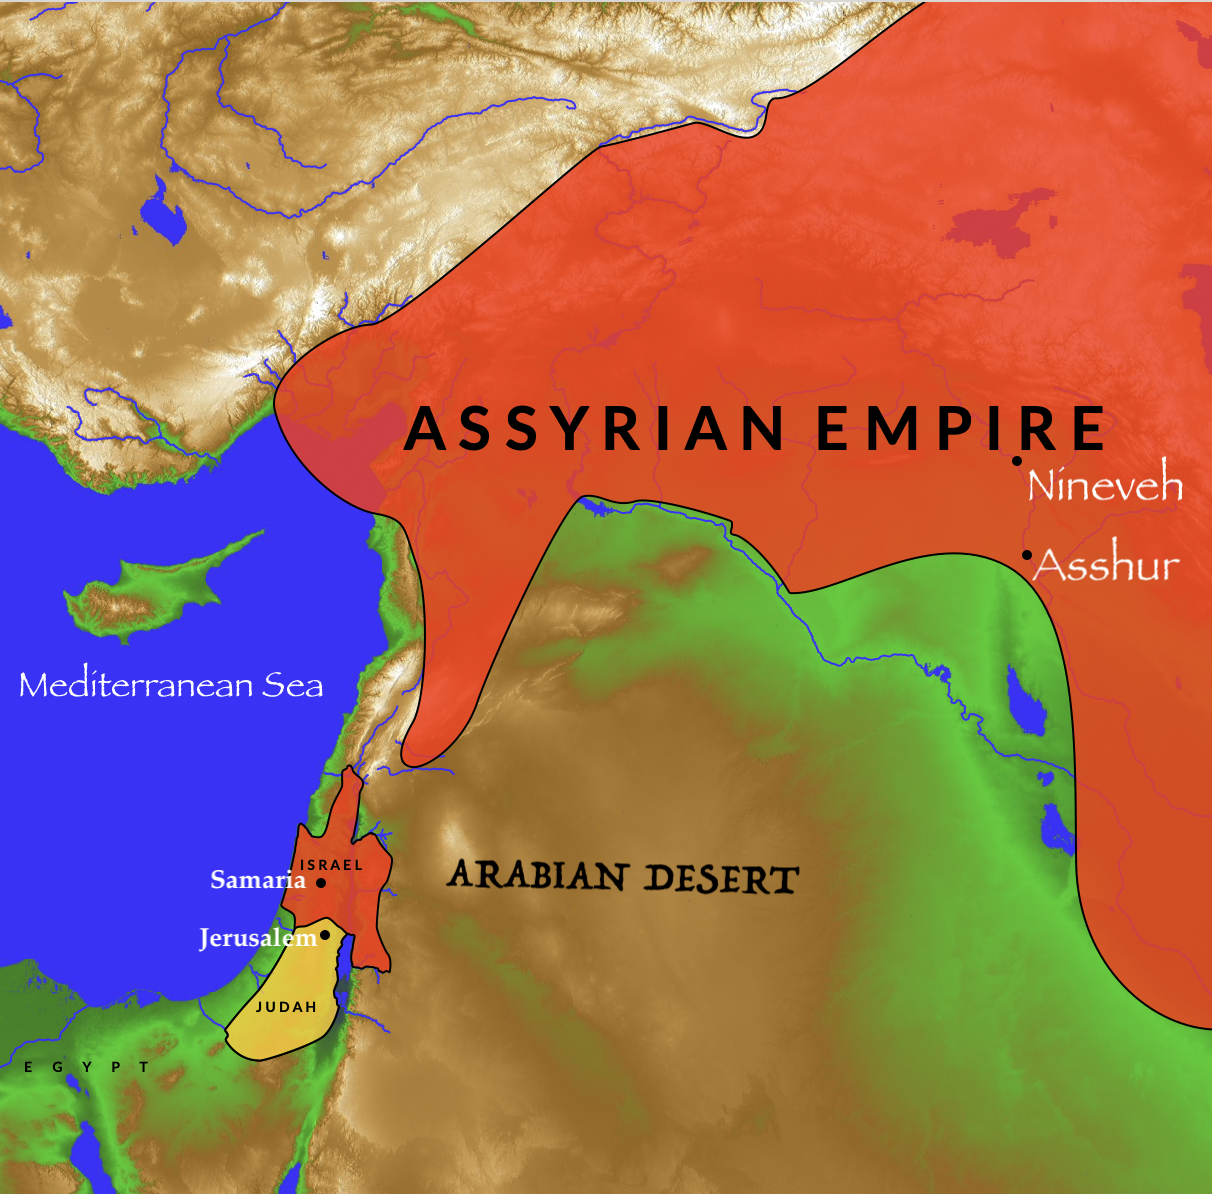 A map of the Assyrian Empire compared to the kingdoms of Israel & Judah.